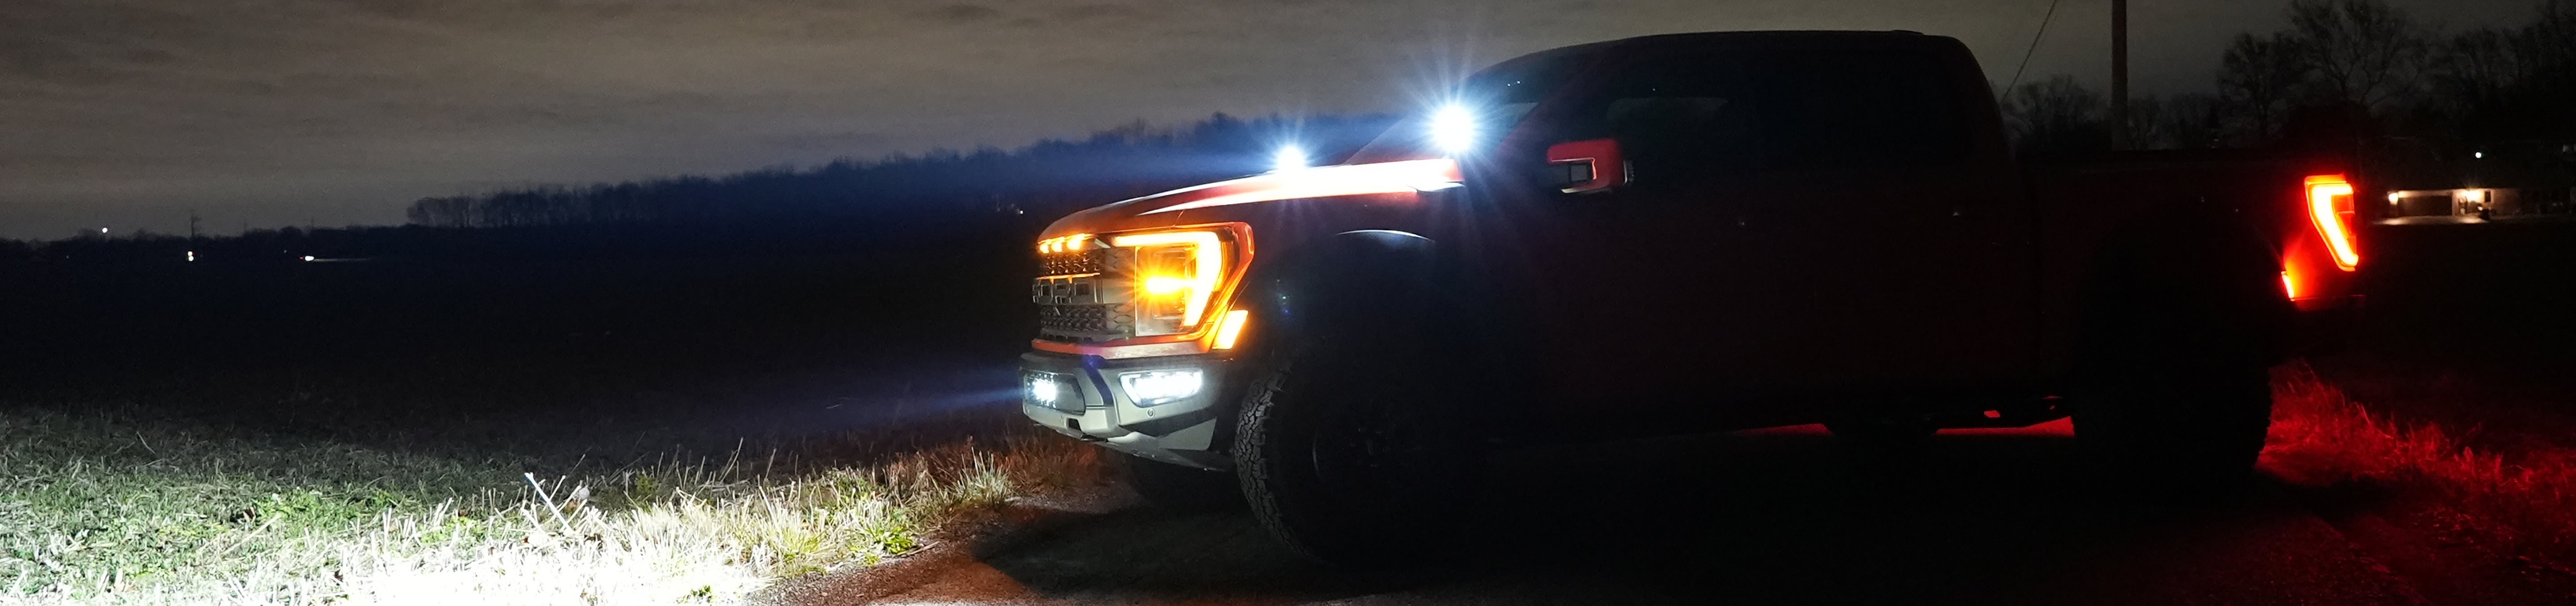 Ford Truck Lights